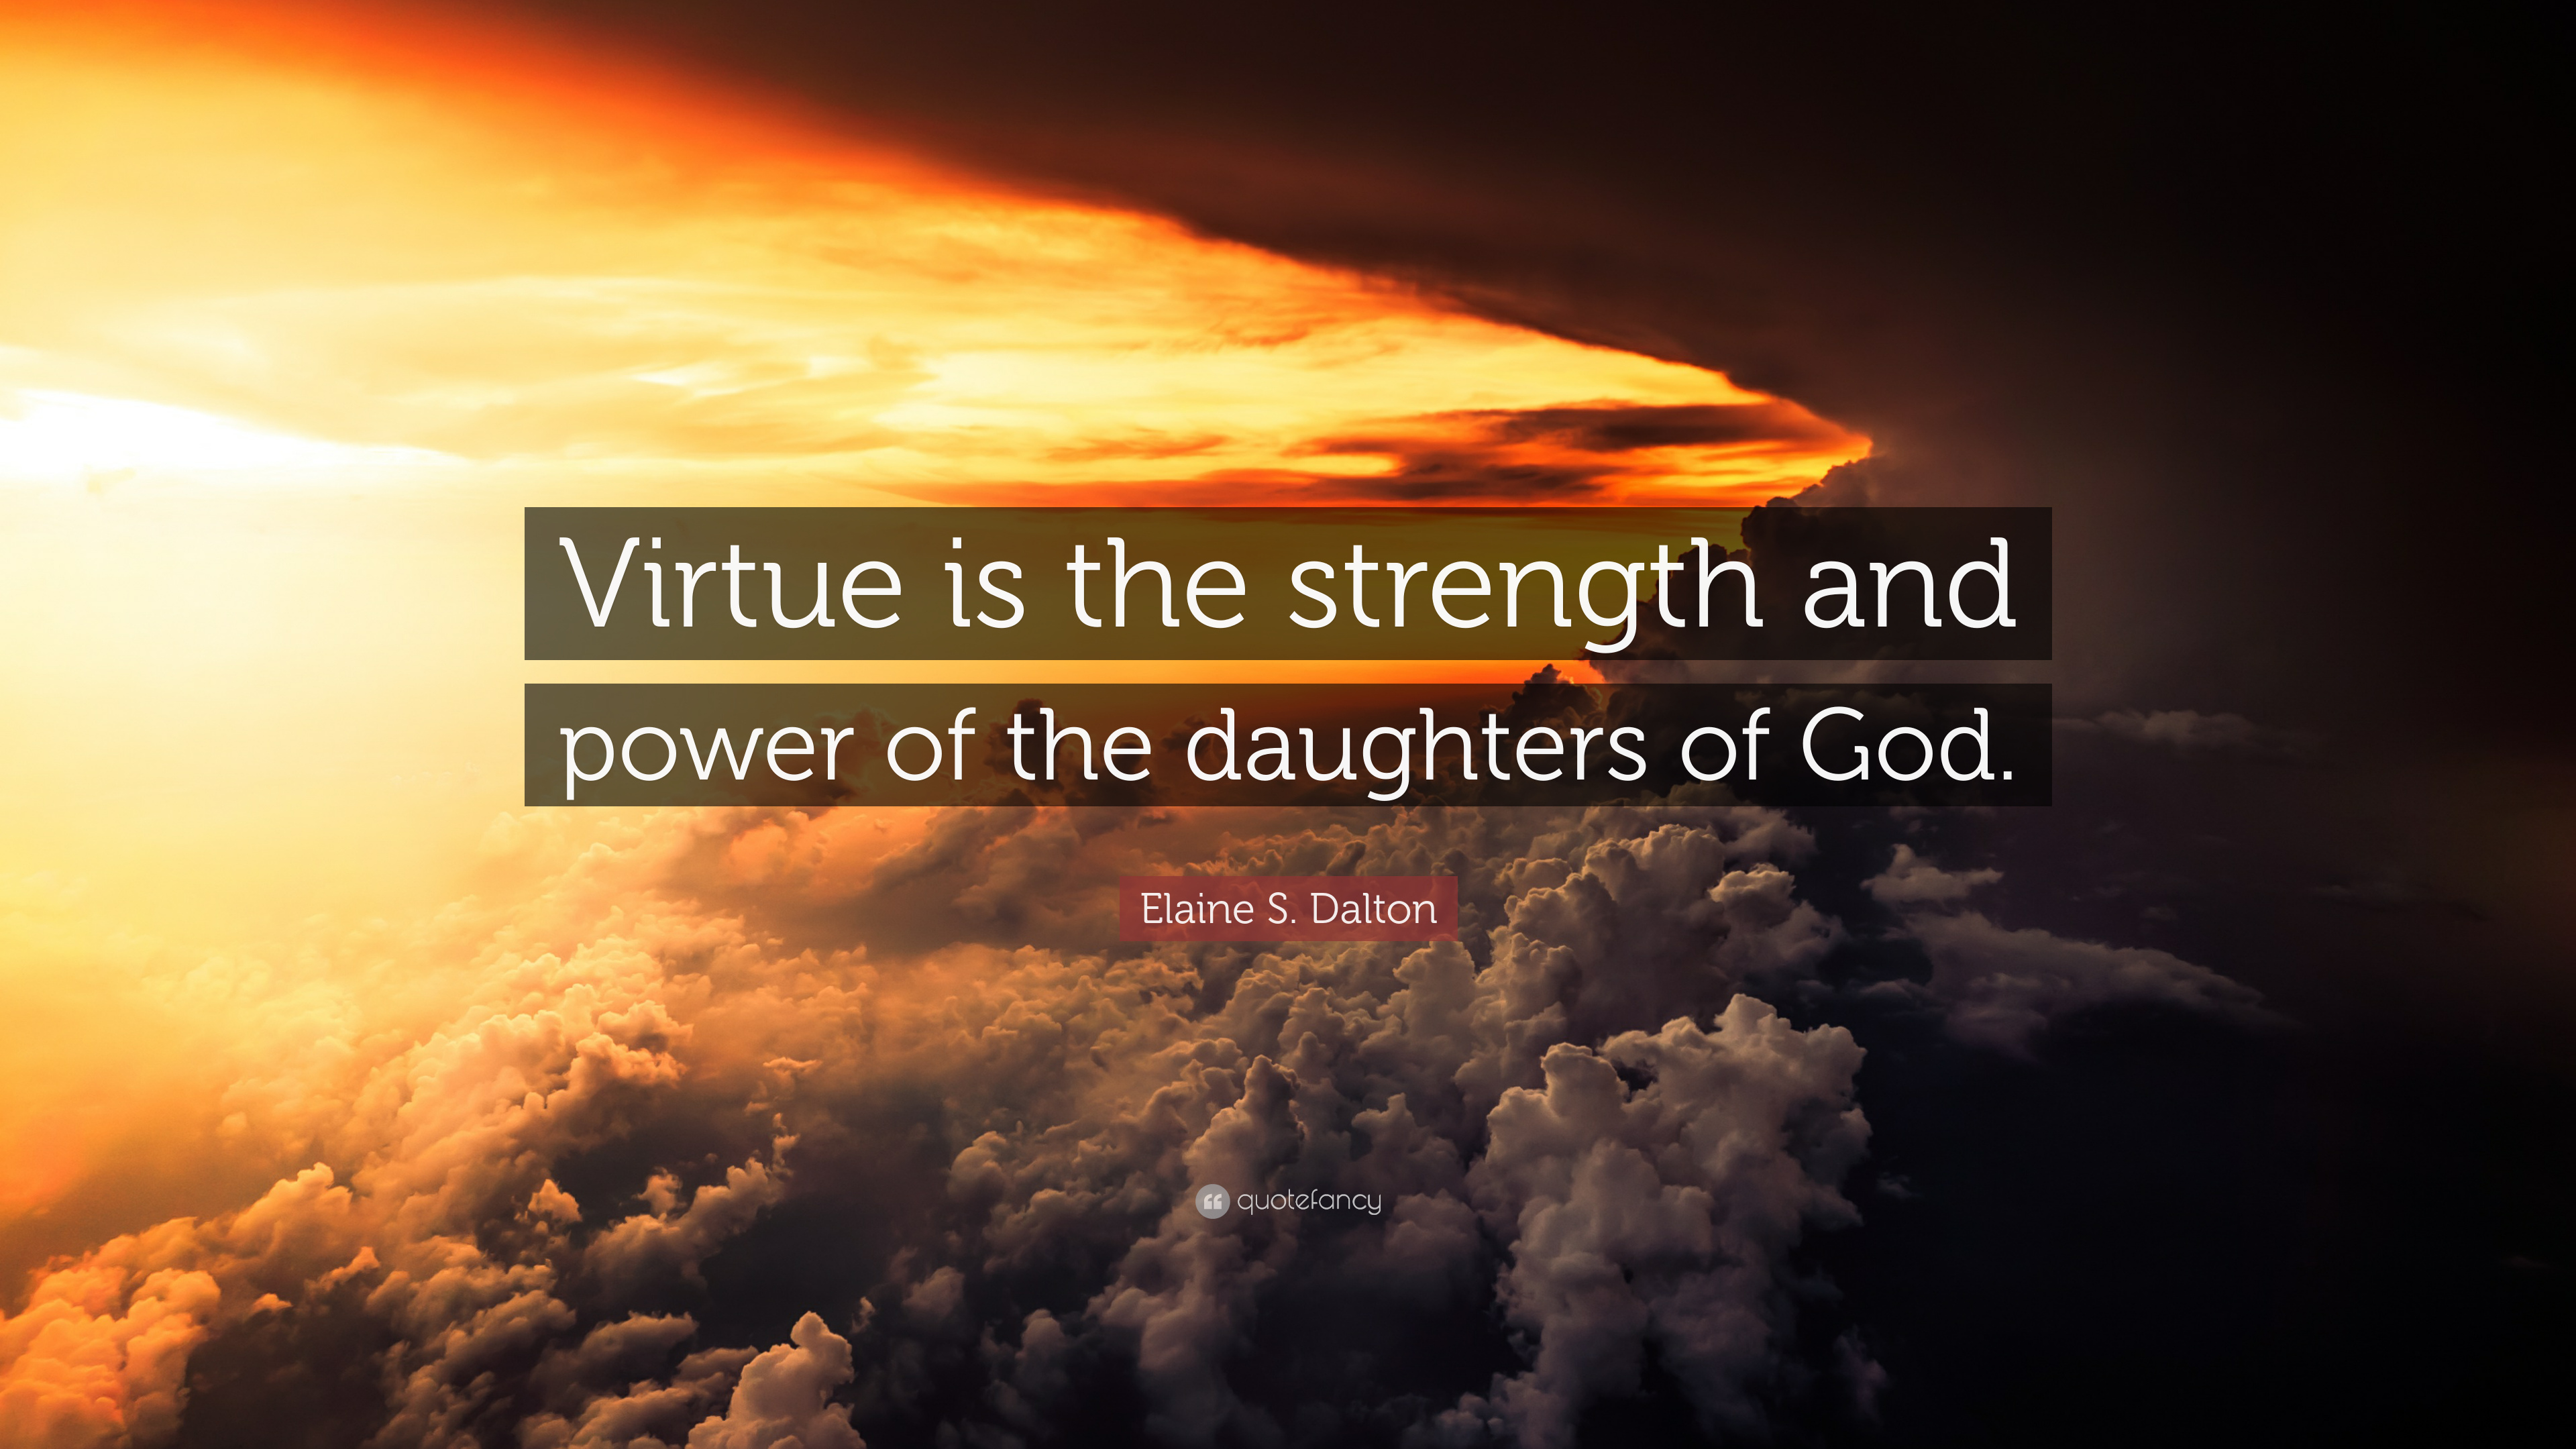 Elaine S. Dalton Quote: “Virtue is the strength and power of the ...